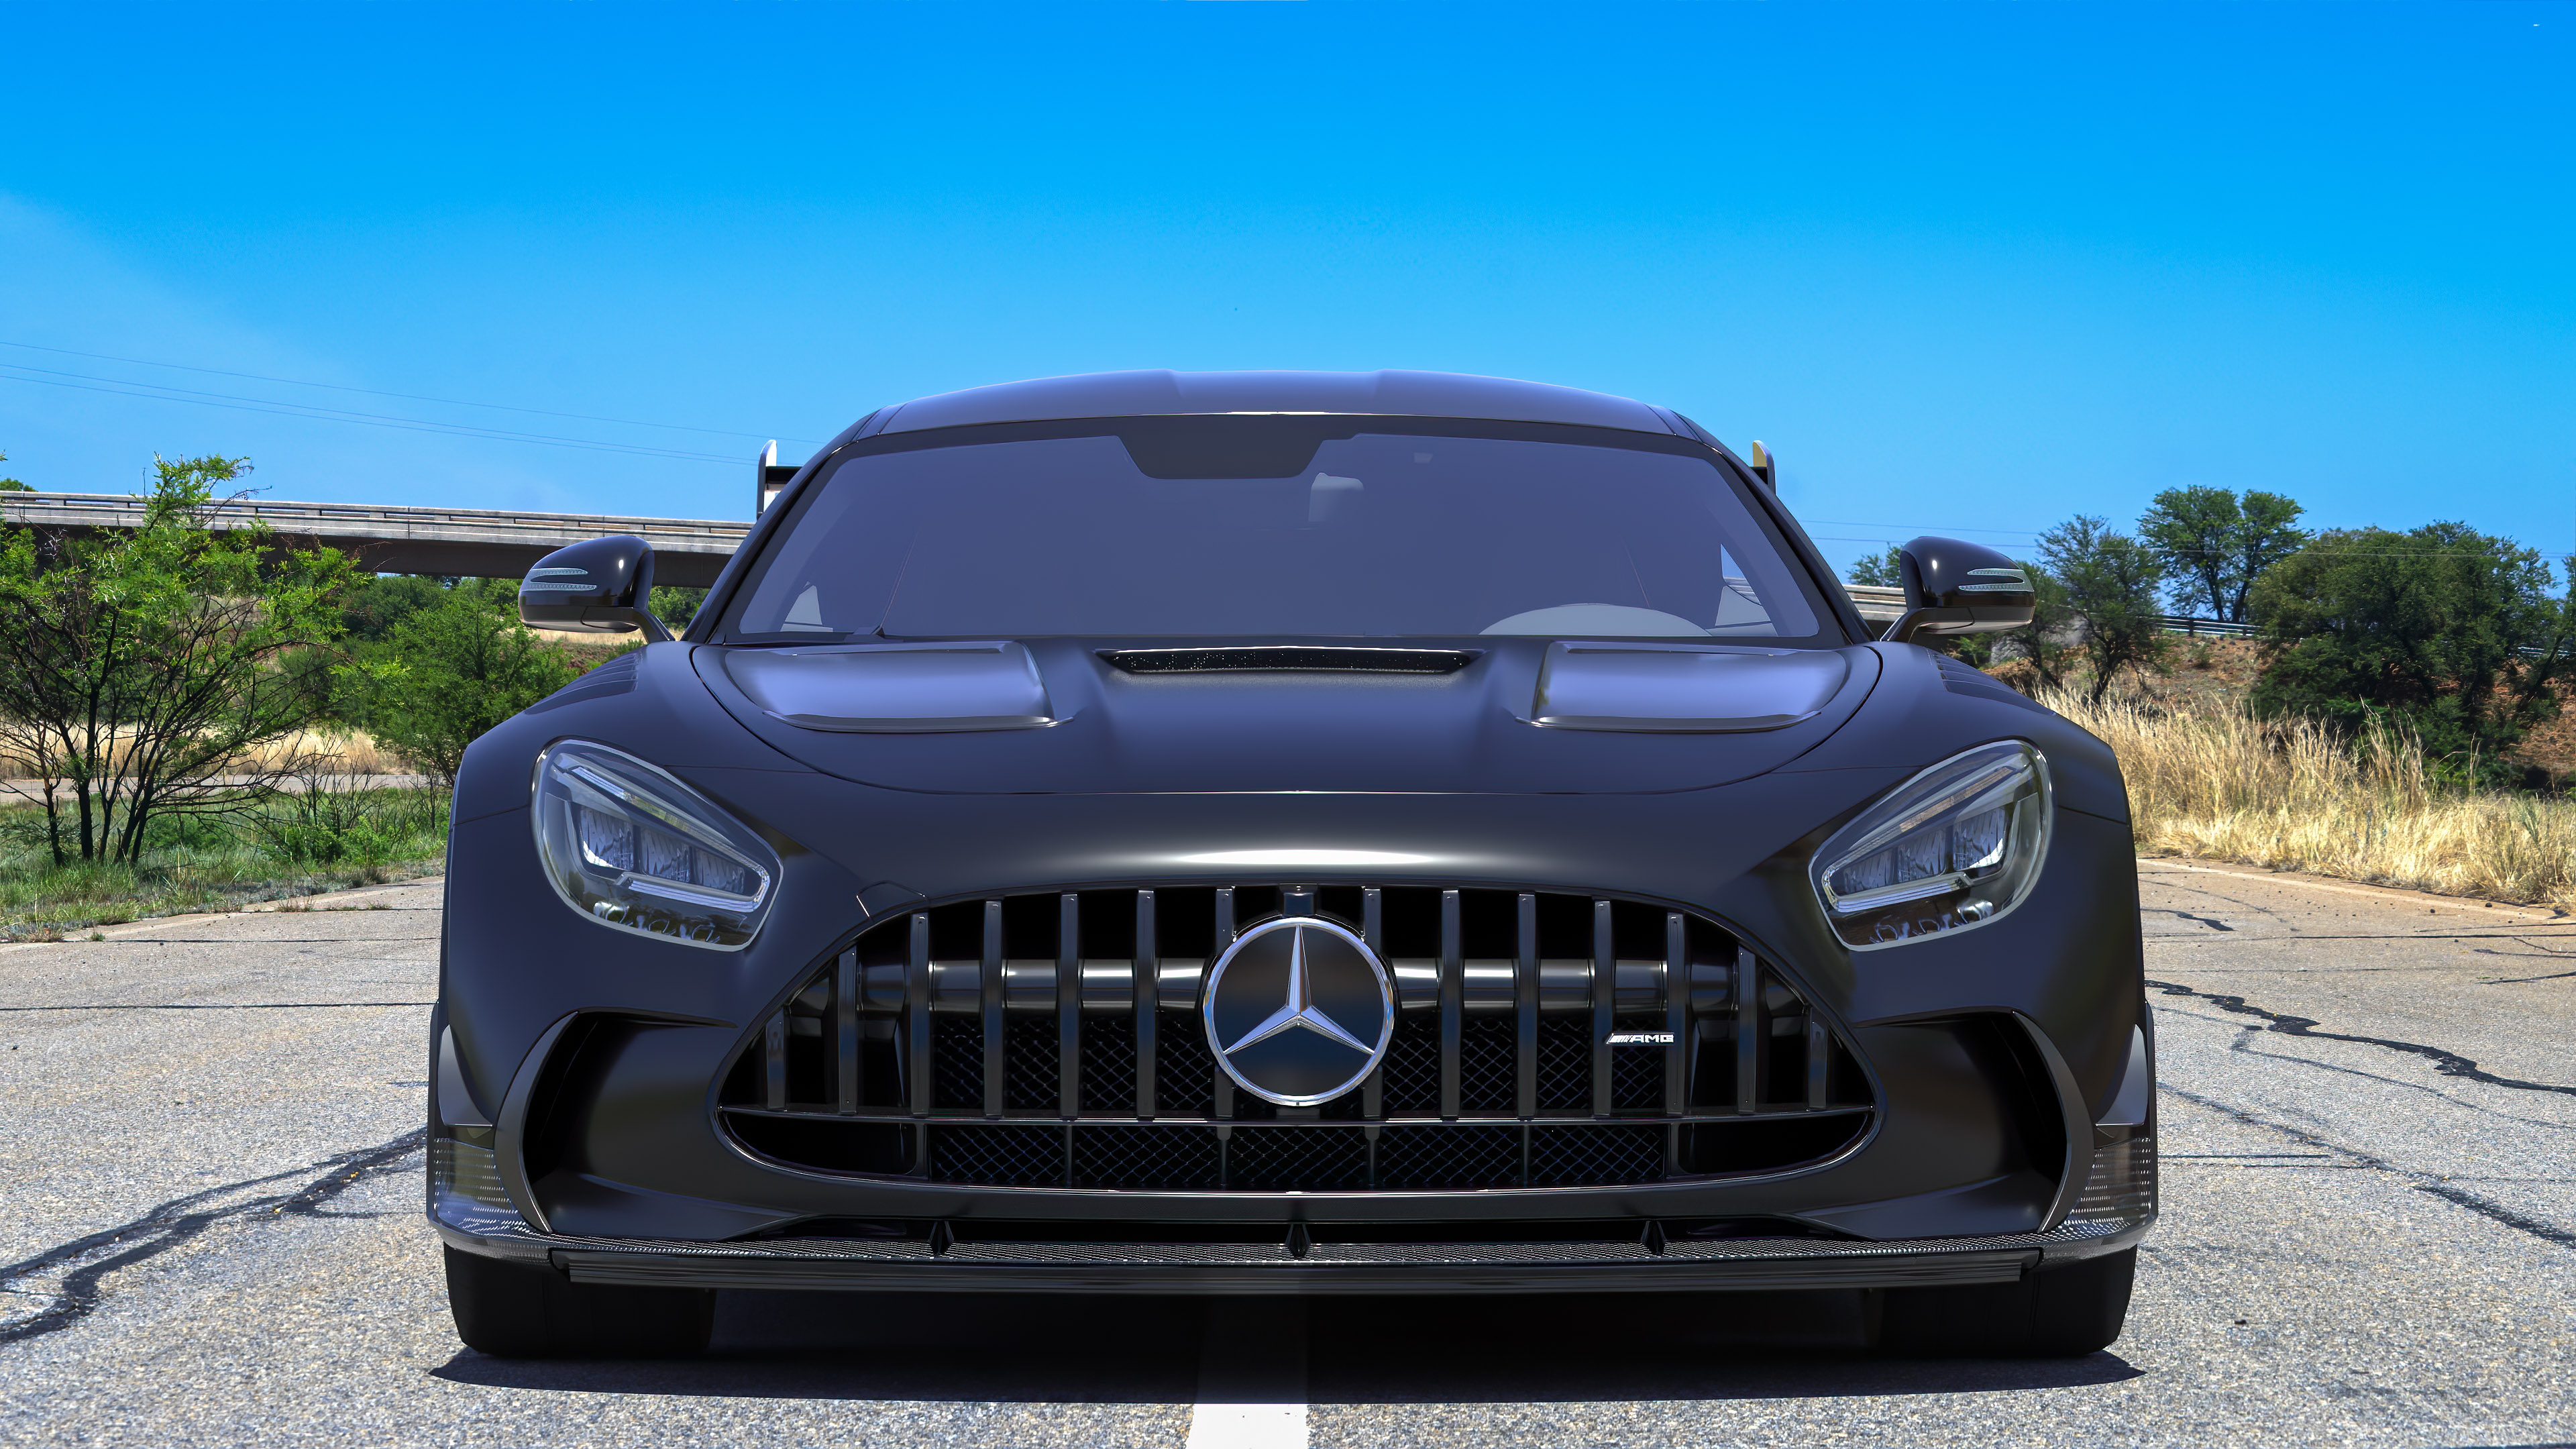 Admire the elegance of black Mercedes AMG GT with our car ultra HD 4K wallpaper for PC, bringing style to your desktop.